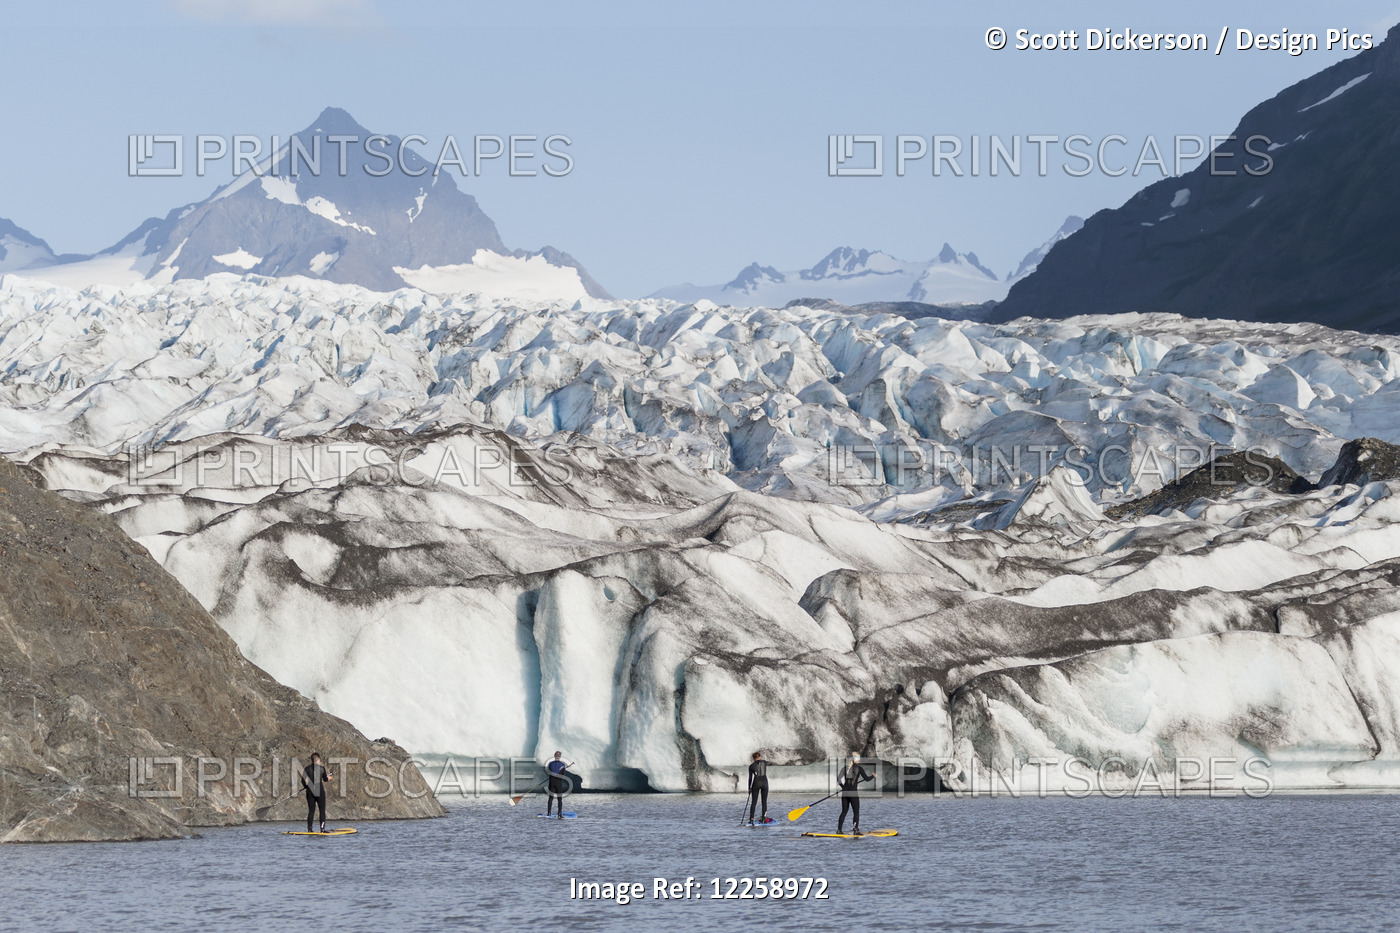 Standup Paddleboarders Paddling On Flatwater With The Grewingk Glacier In The ...